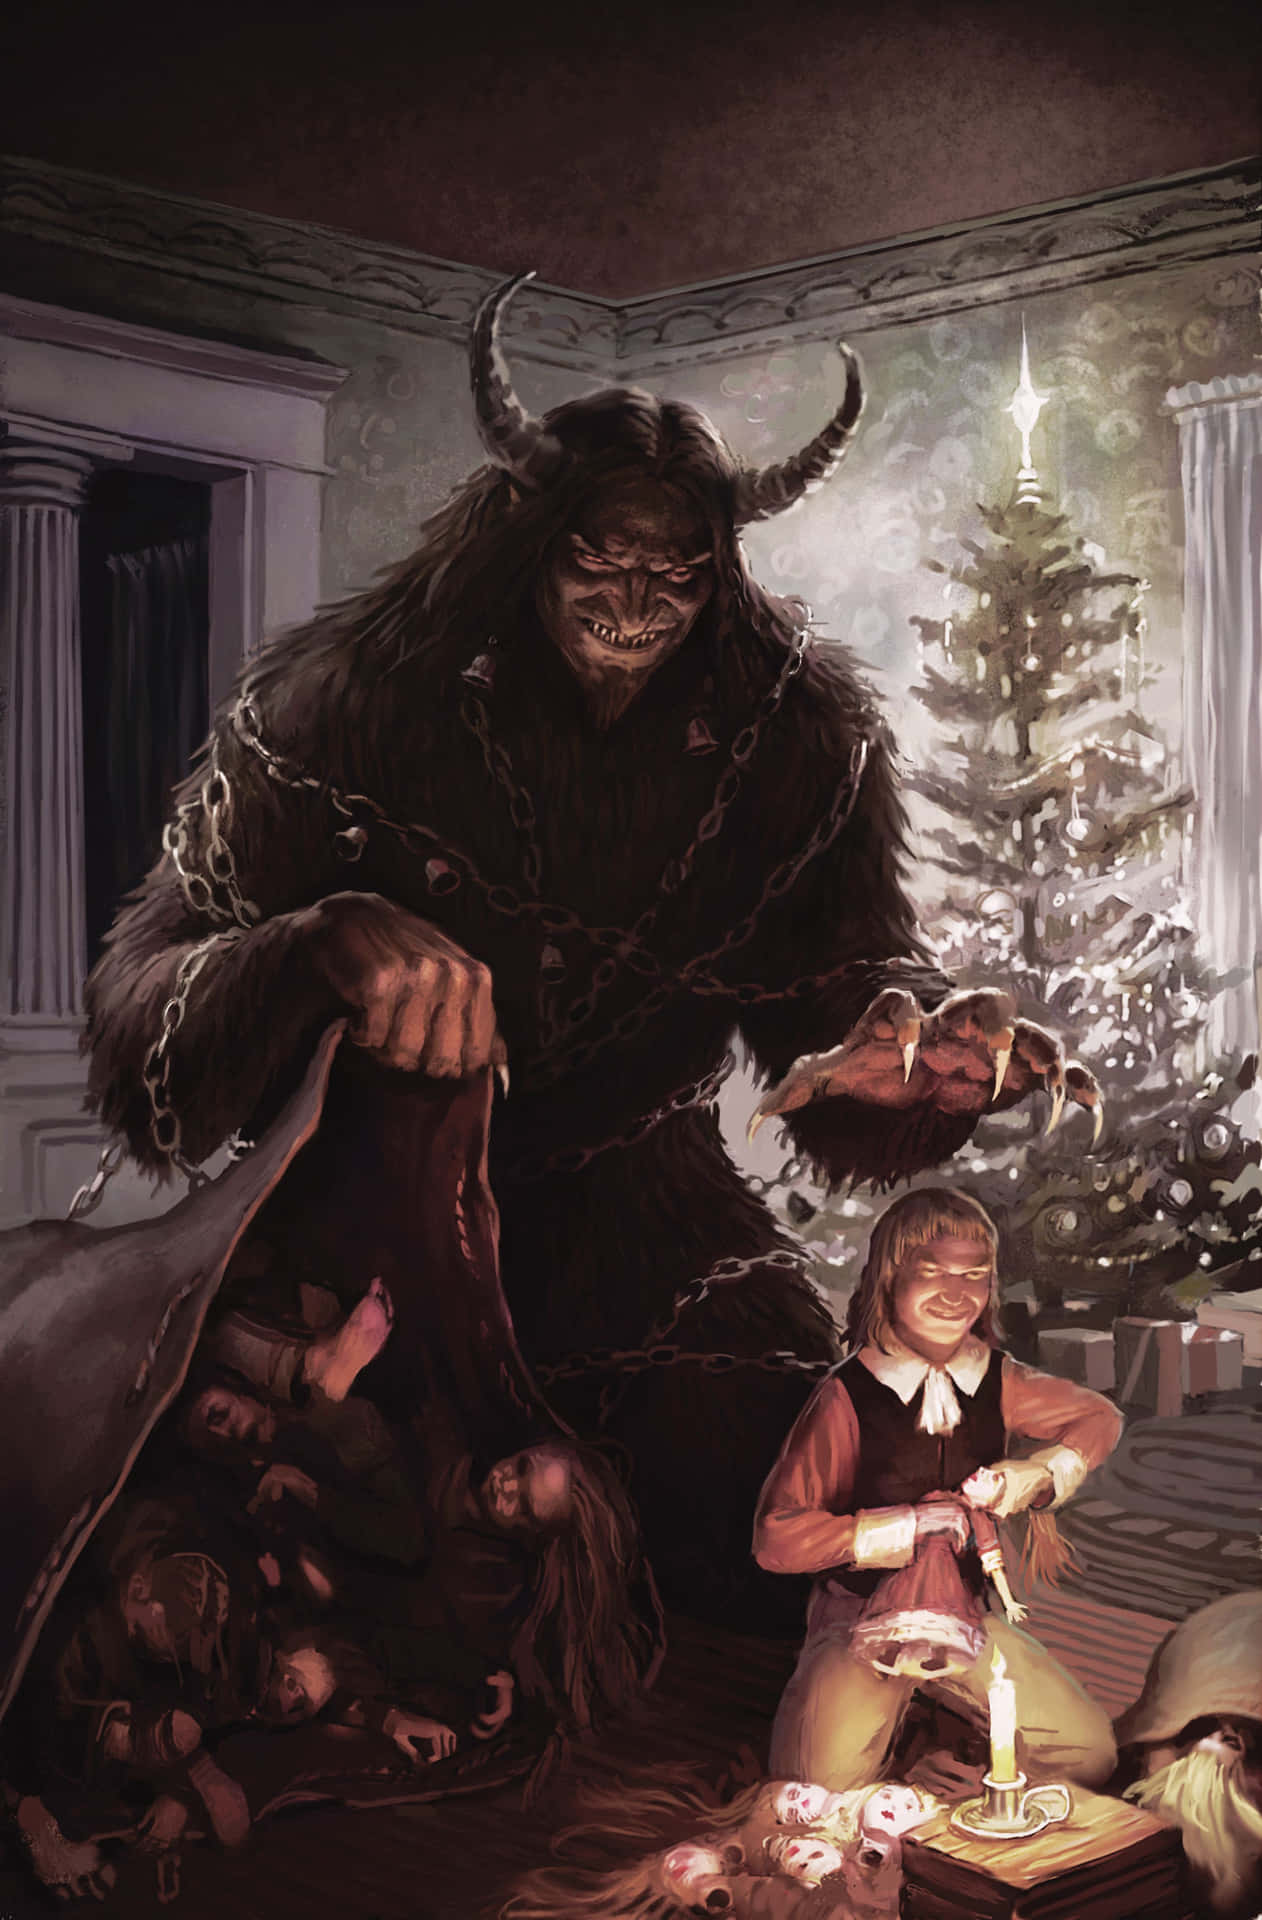 The ancient creature known as Krampus is here to cause trouble on Christmas. Wallpaper